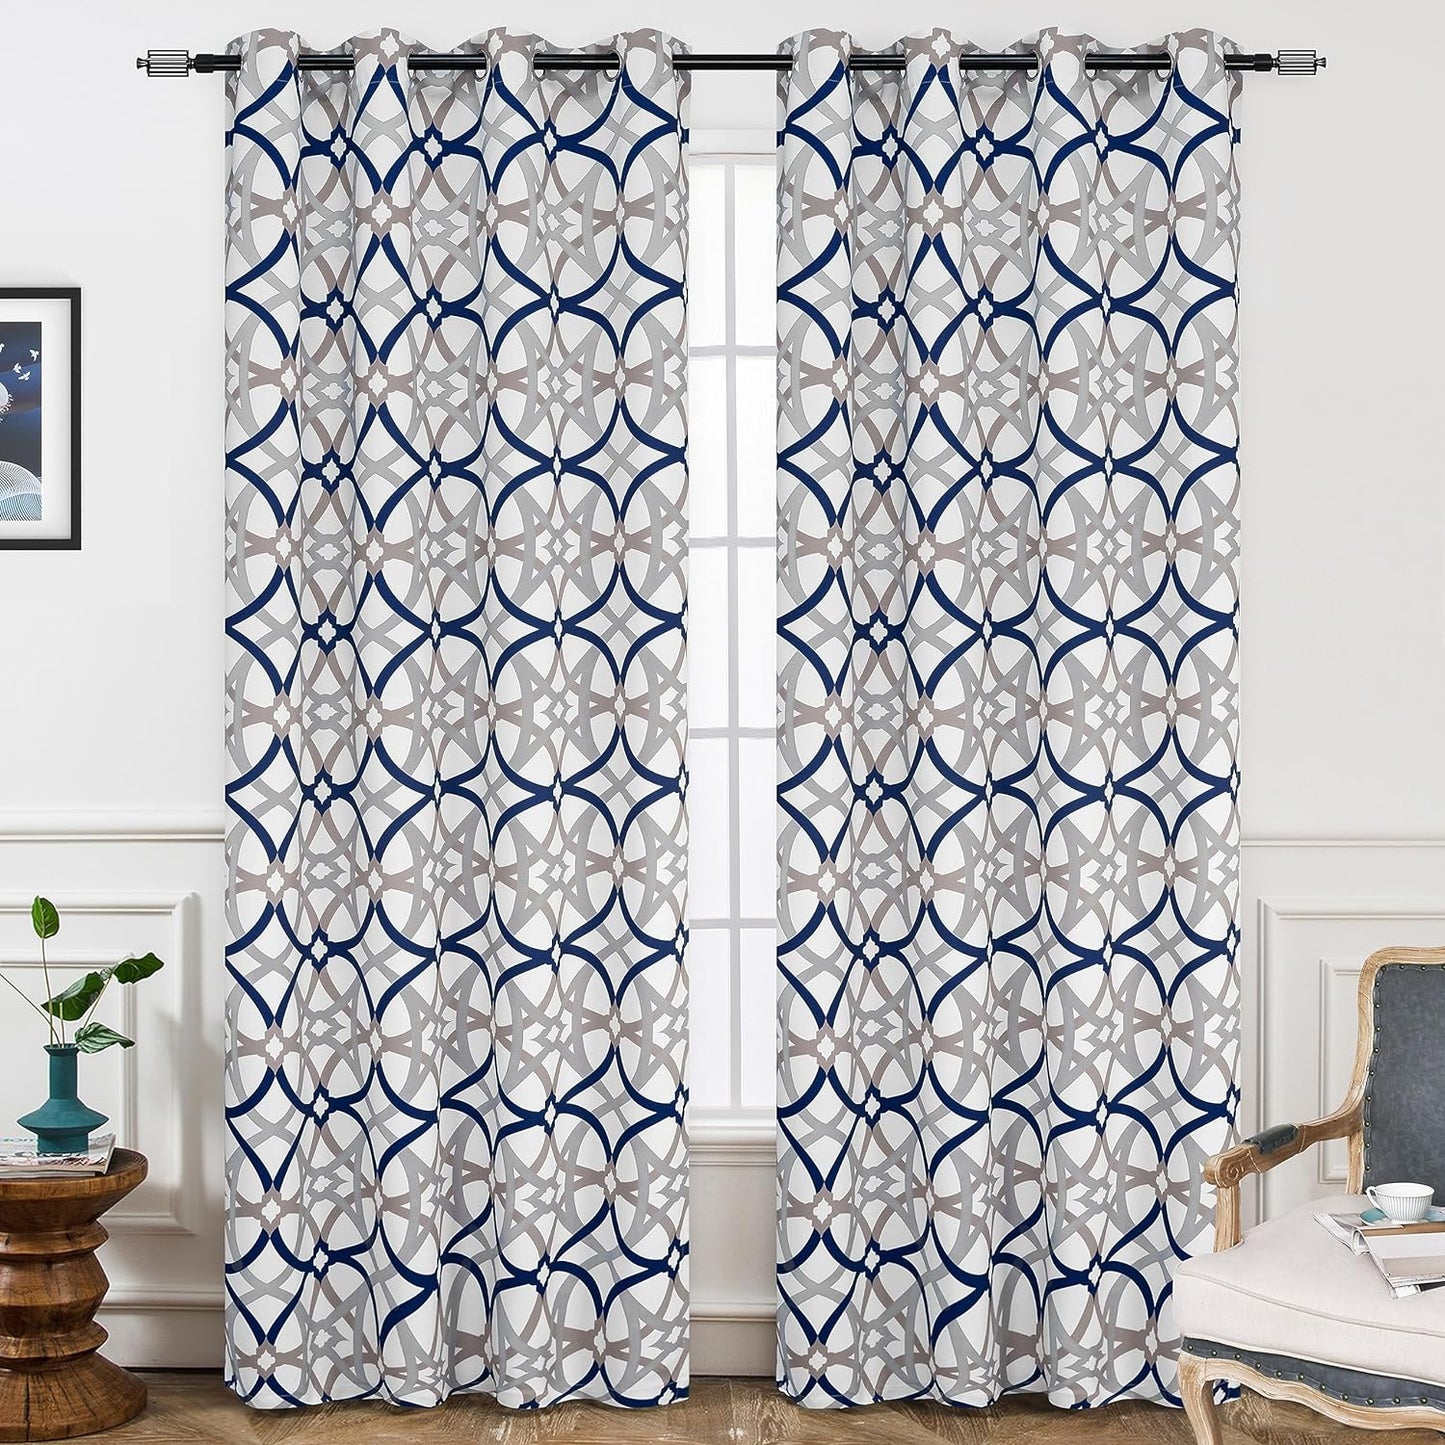 Driftaway Alexander Thermal Blackout Grommet Unlined Window Curtains Spiral Geo Trellis Pattern Set of 2 Panels Each Size 52 Inch by 84 Inch Red and Gray  DriftAway Navy/Gray 52"X102" 